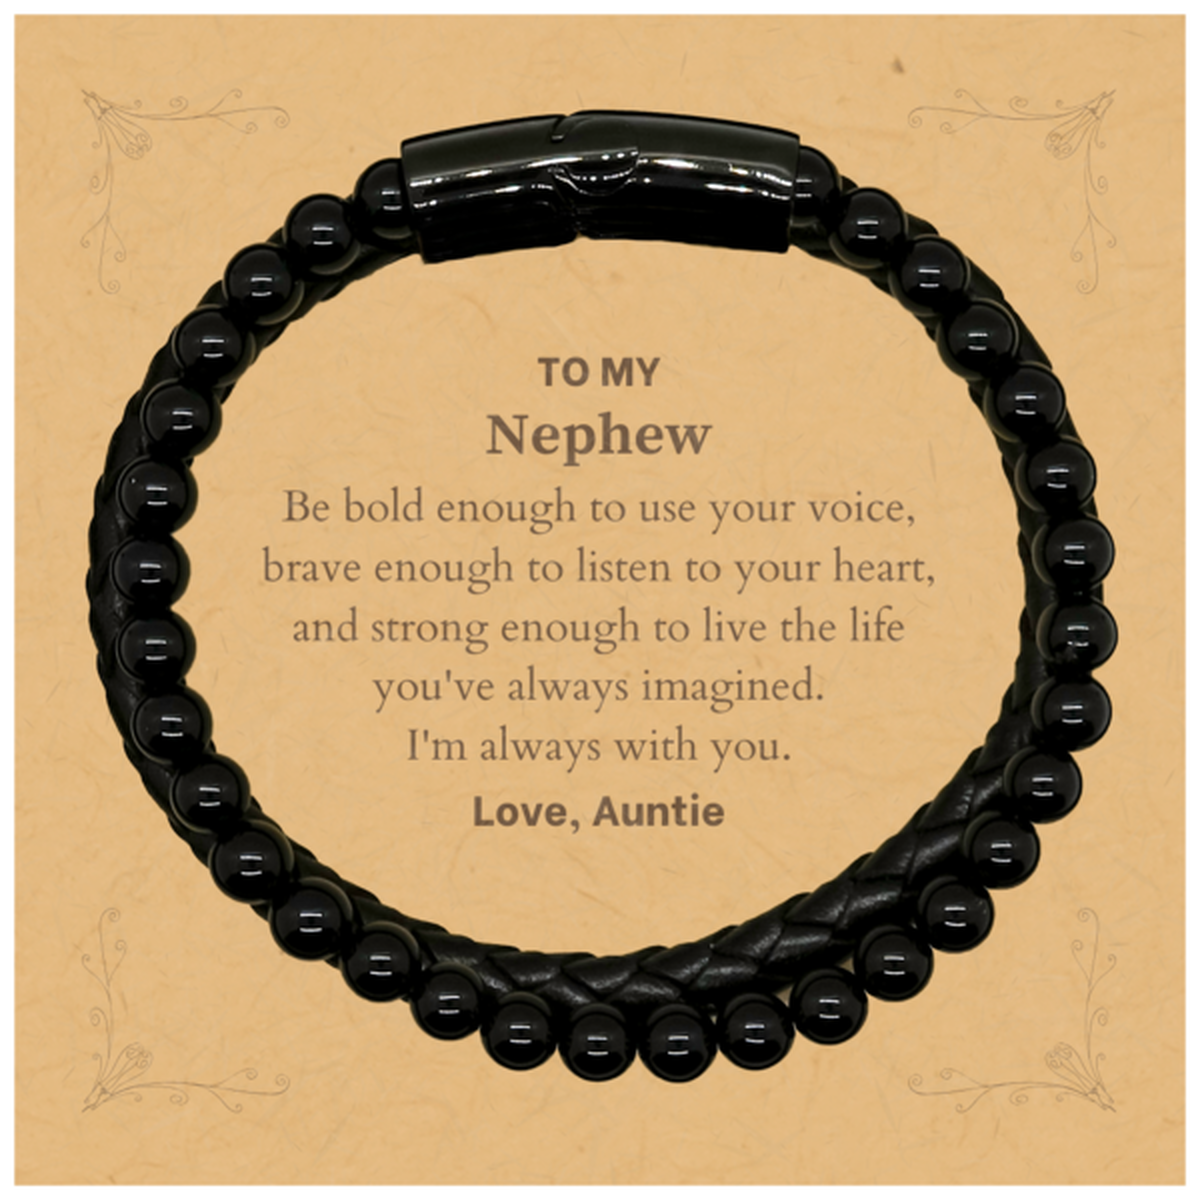 Keepsake Nephew Stone Leather Bracelets Gift Idea Graduation Christmas Birthday Nephew from Auntie, Nephew Be bold enough to use your voice, brave enough to listen to your heart. Love, Auntie